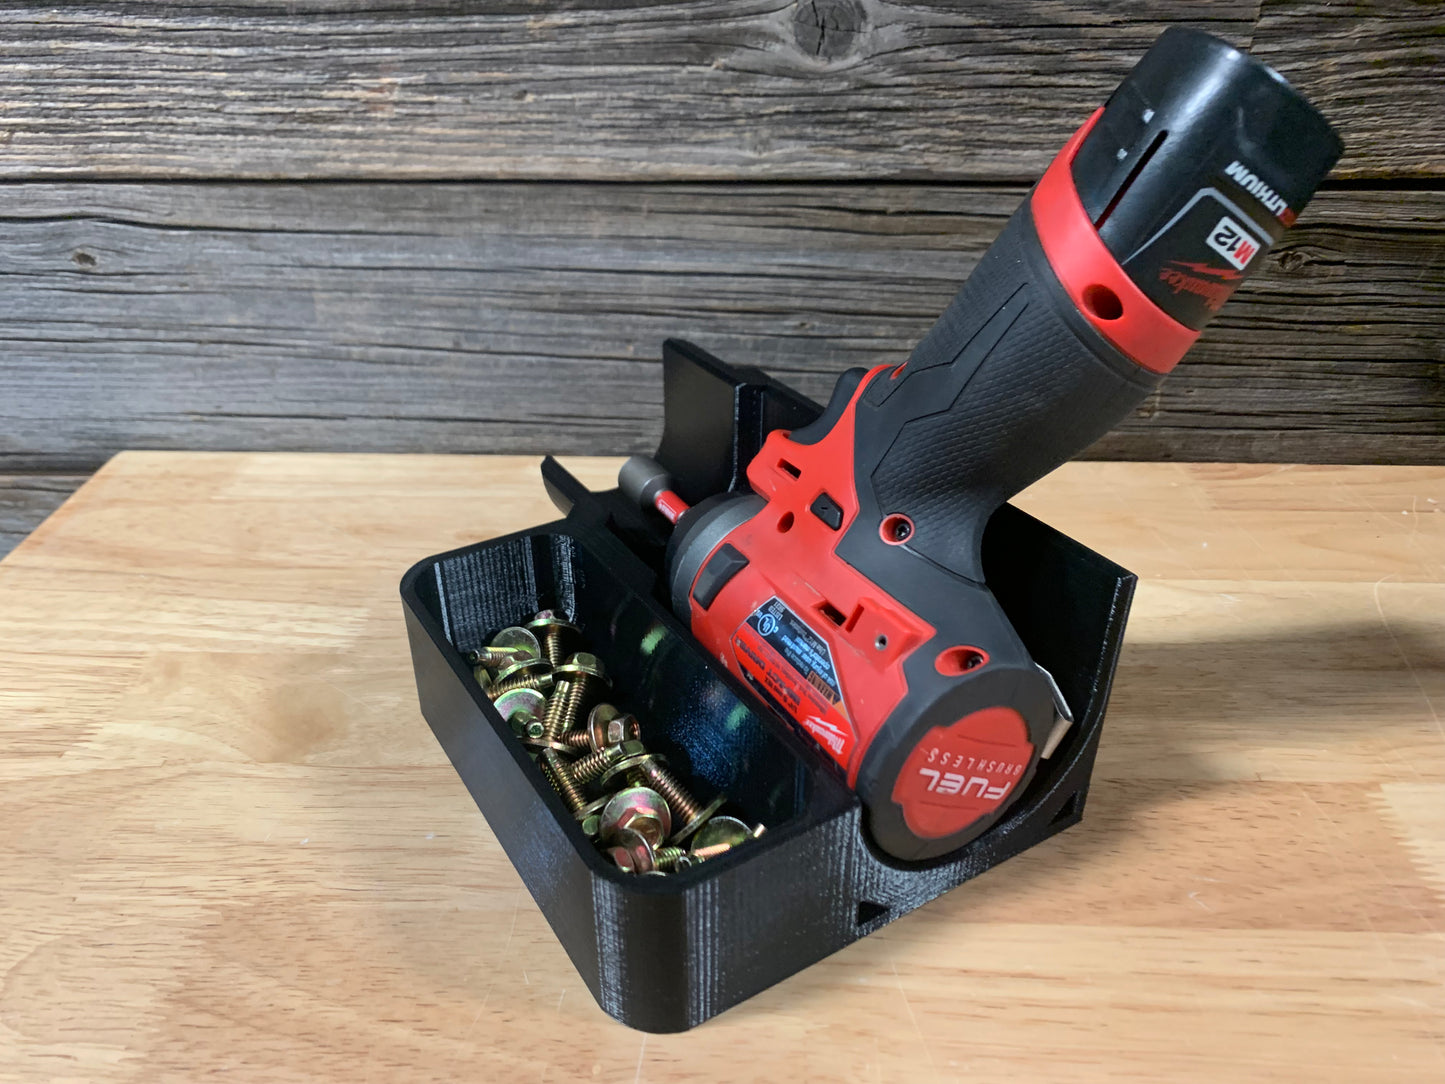 Bench Top Drill Holder